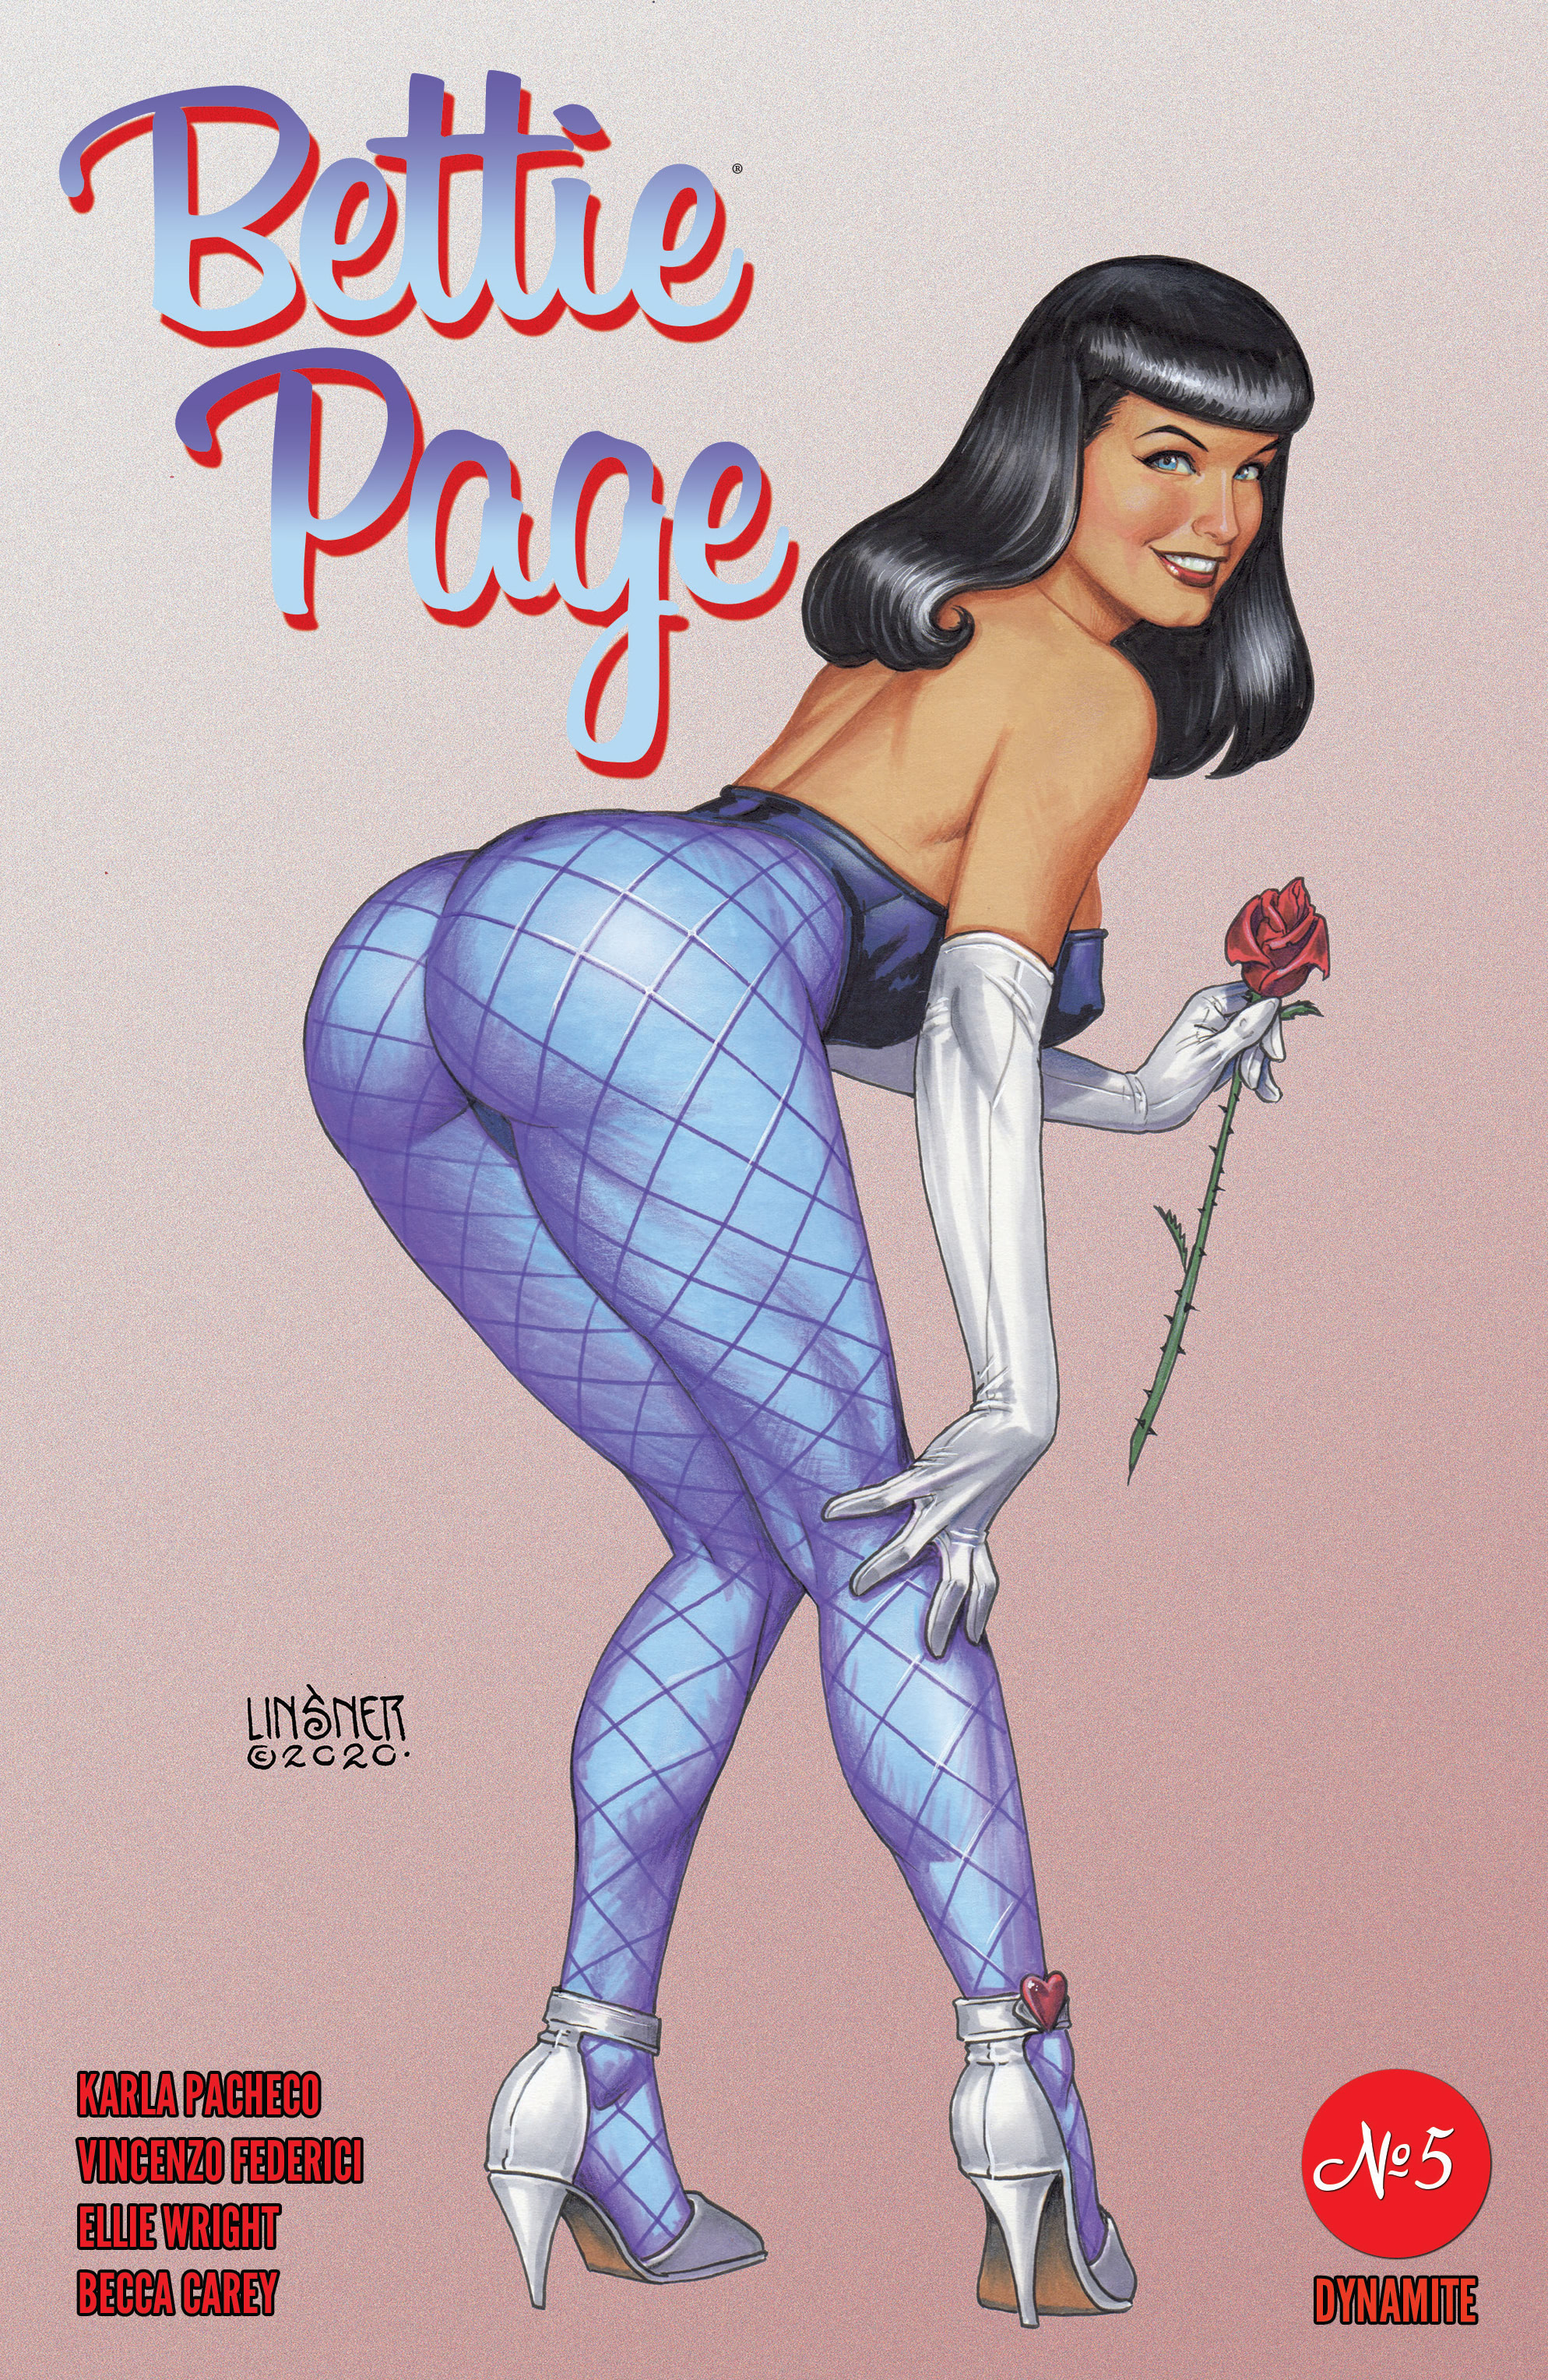 Read online Bettie Page (2020) comic -  Issue #5 - 3